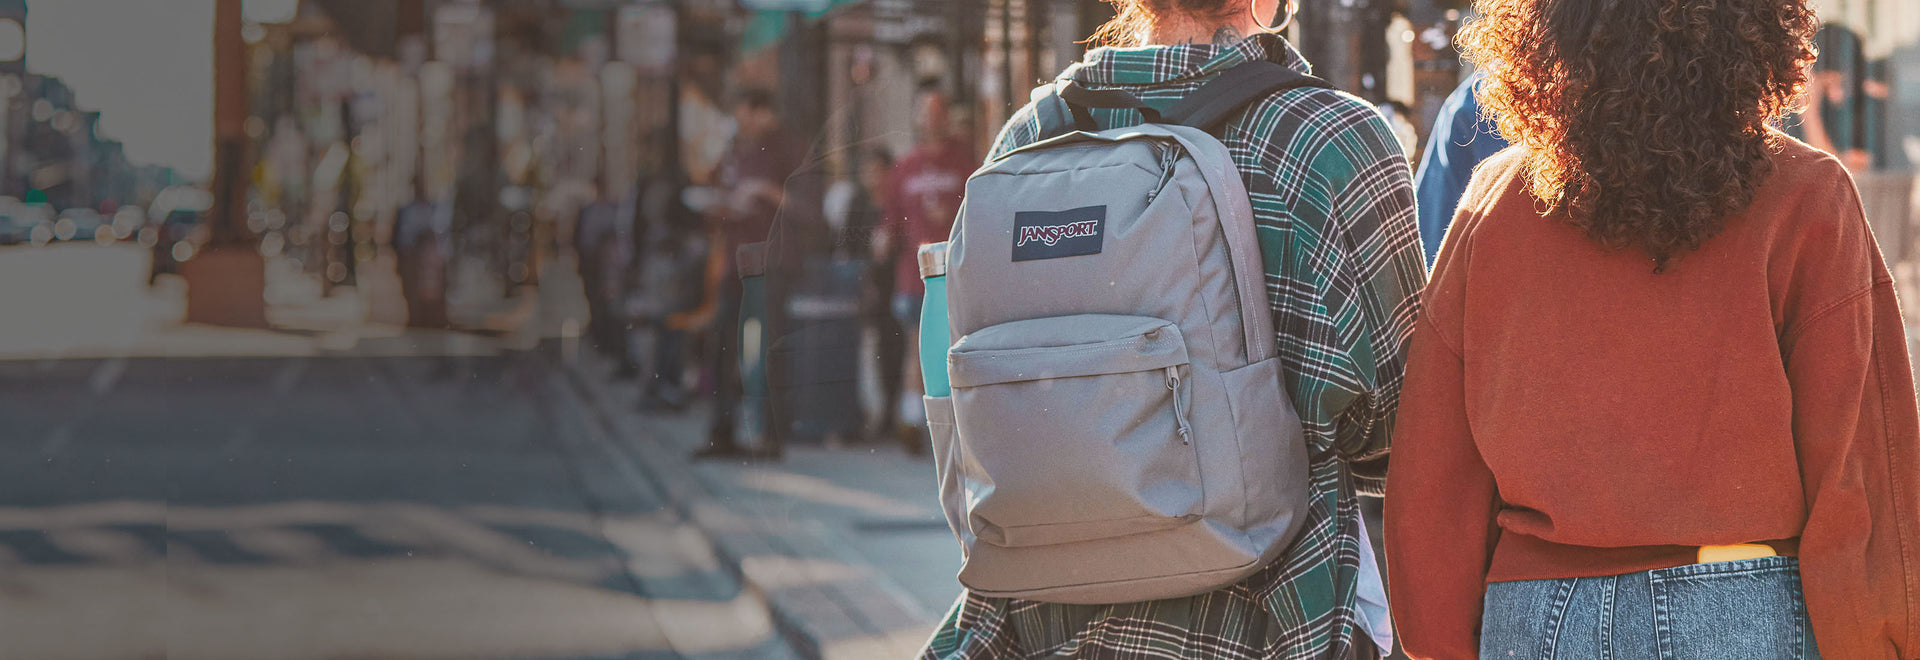 The 36 best school backpacks of 2023 for students of all ages